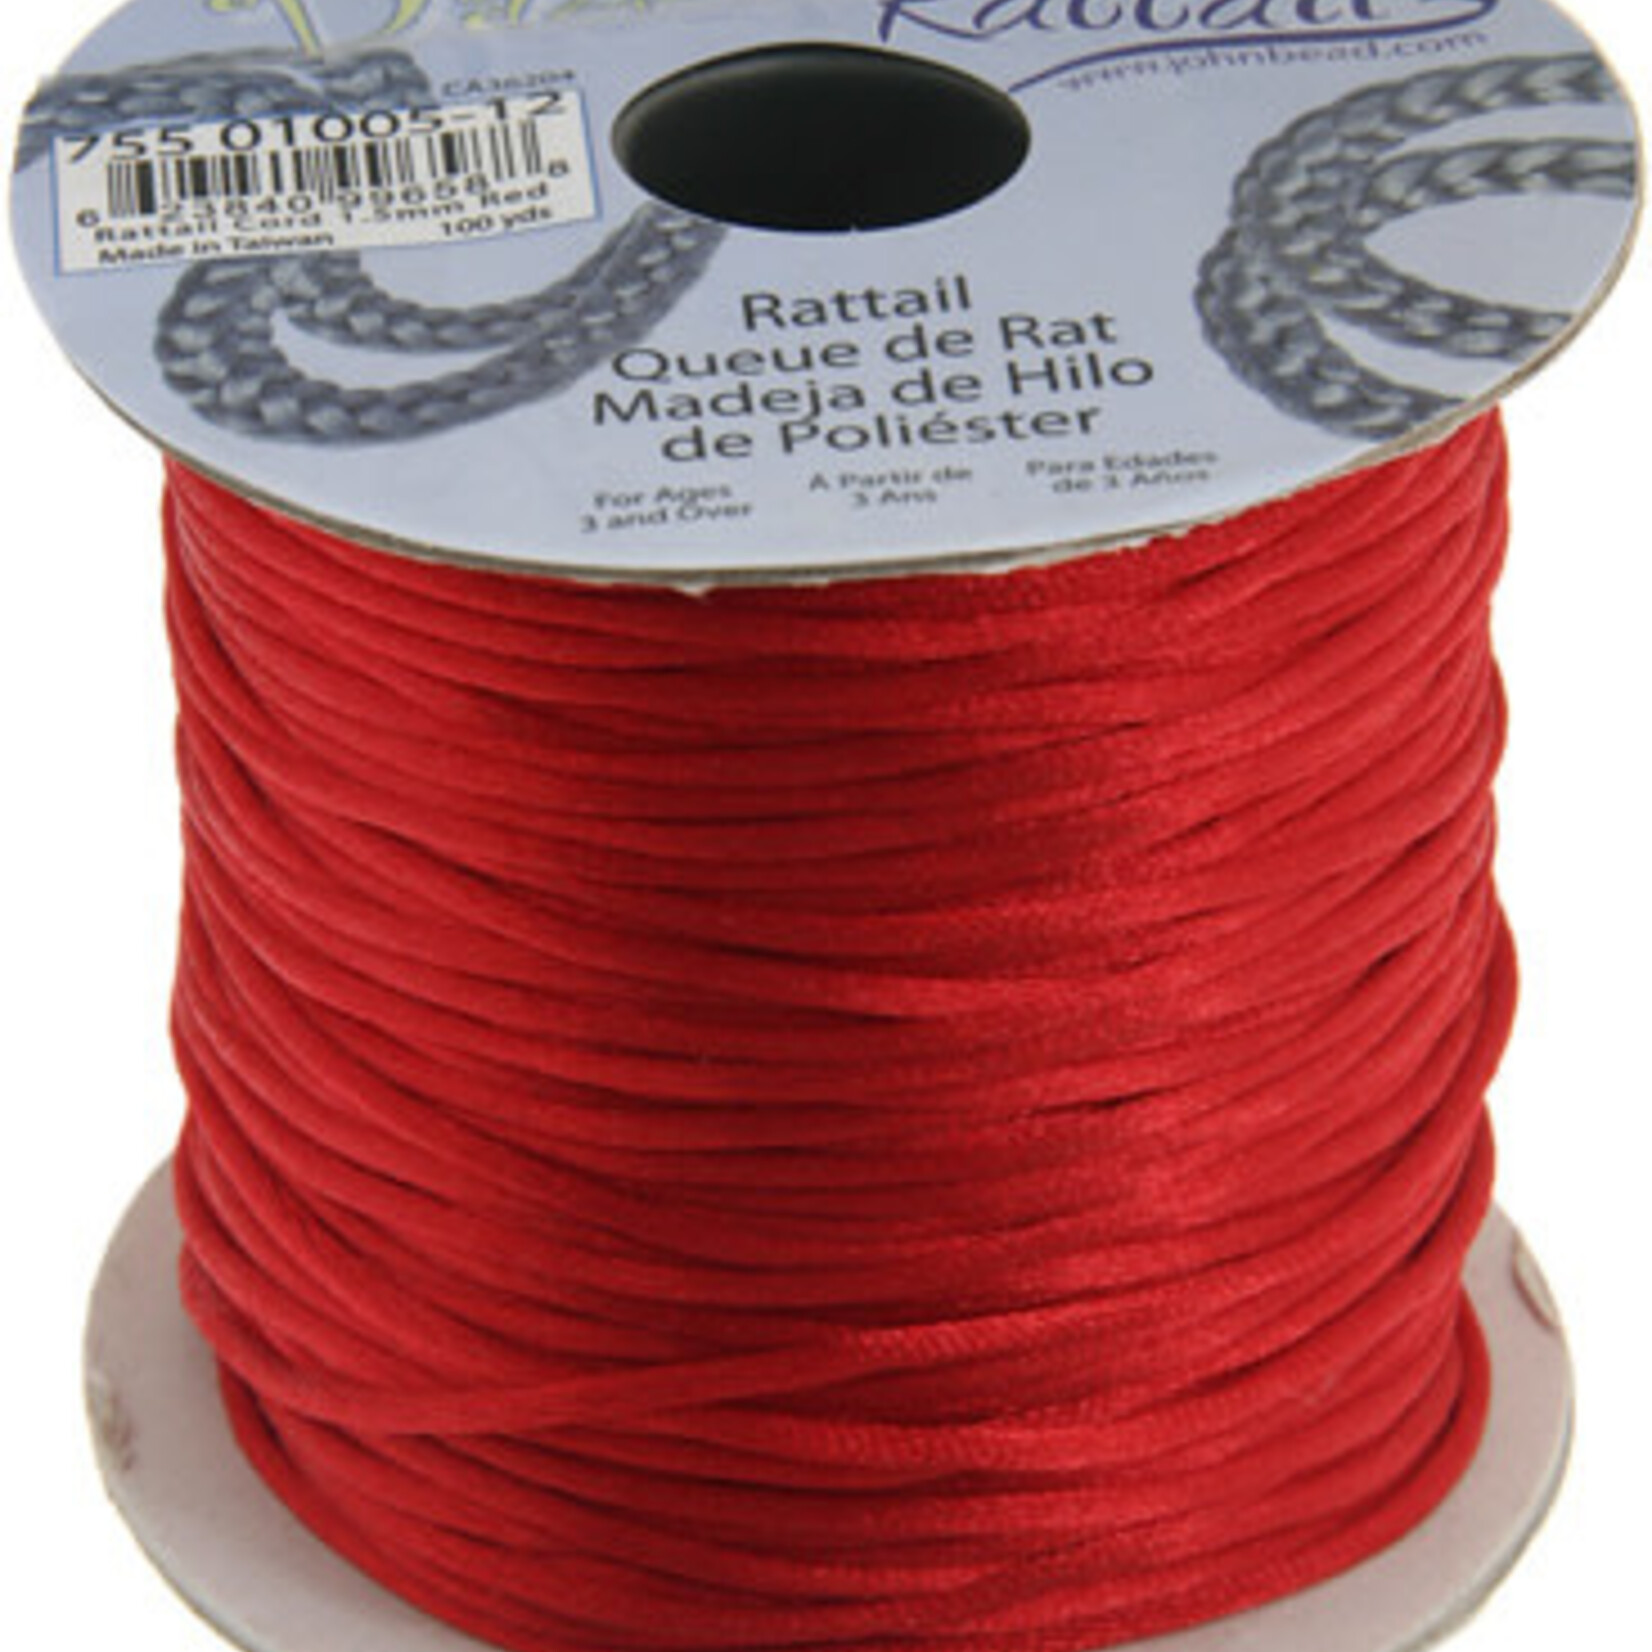 Rattail Cord 1.5mm (100 yards)  Red